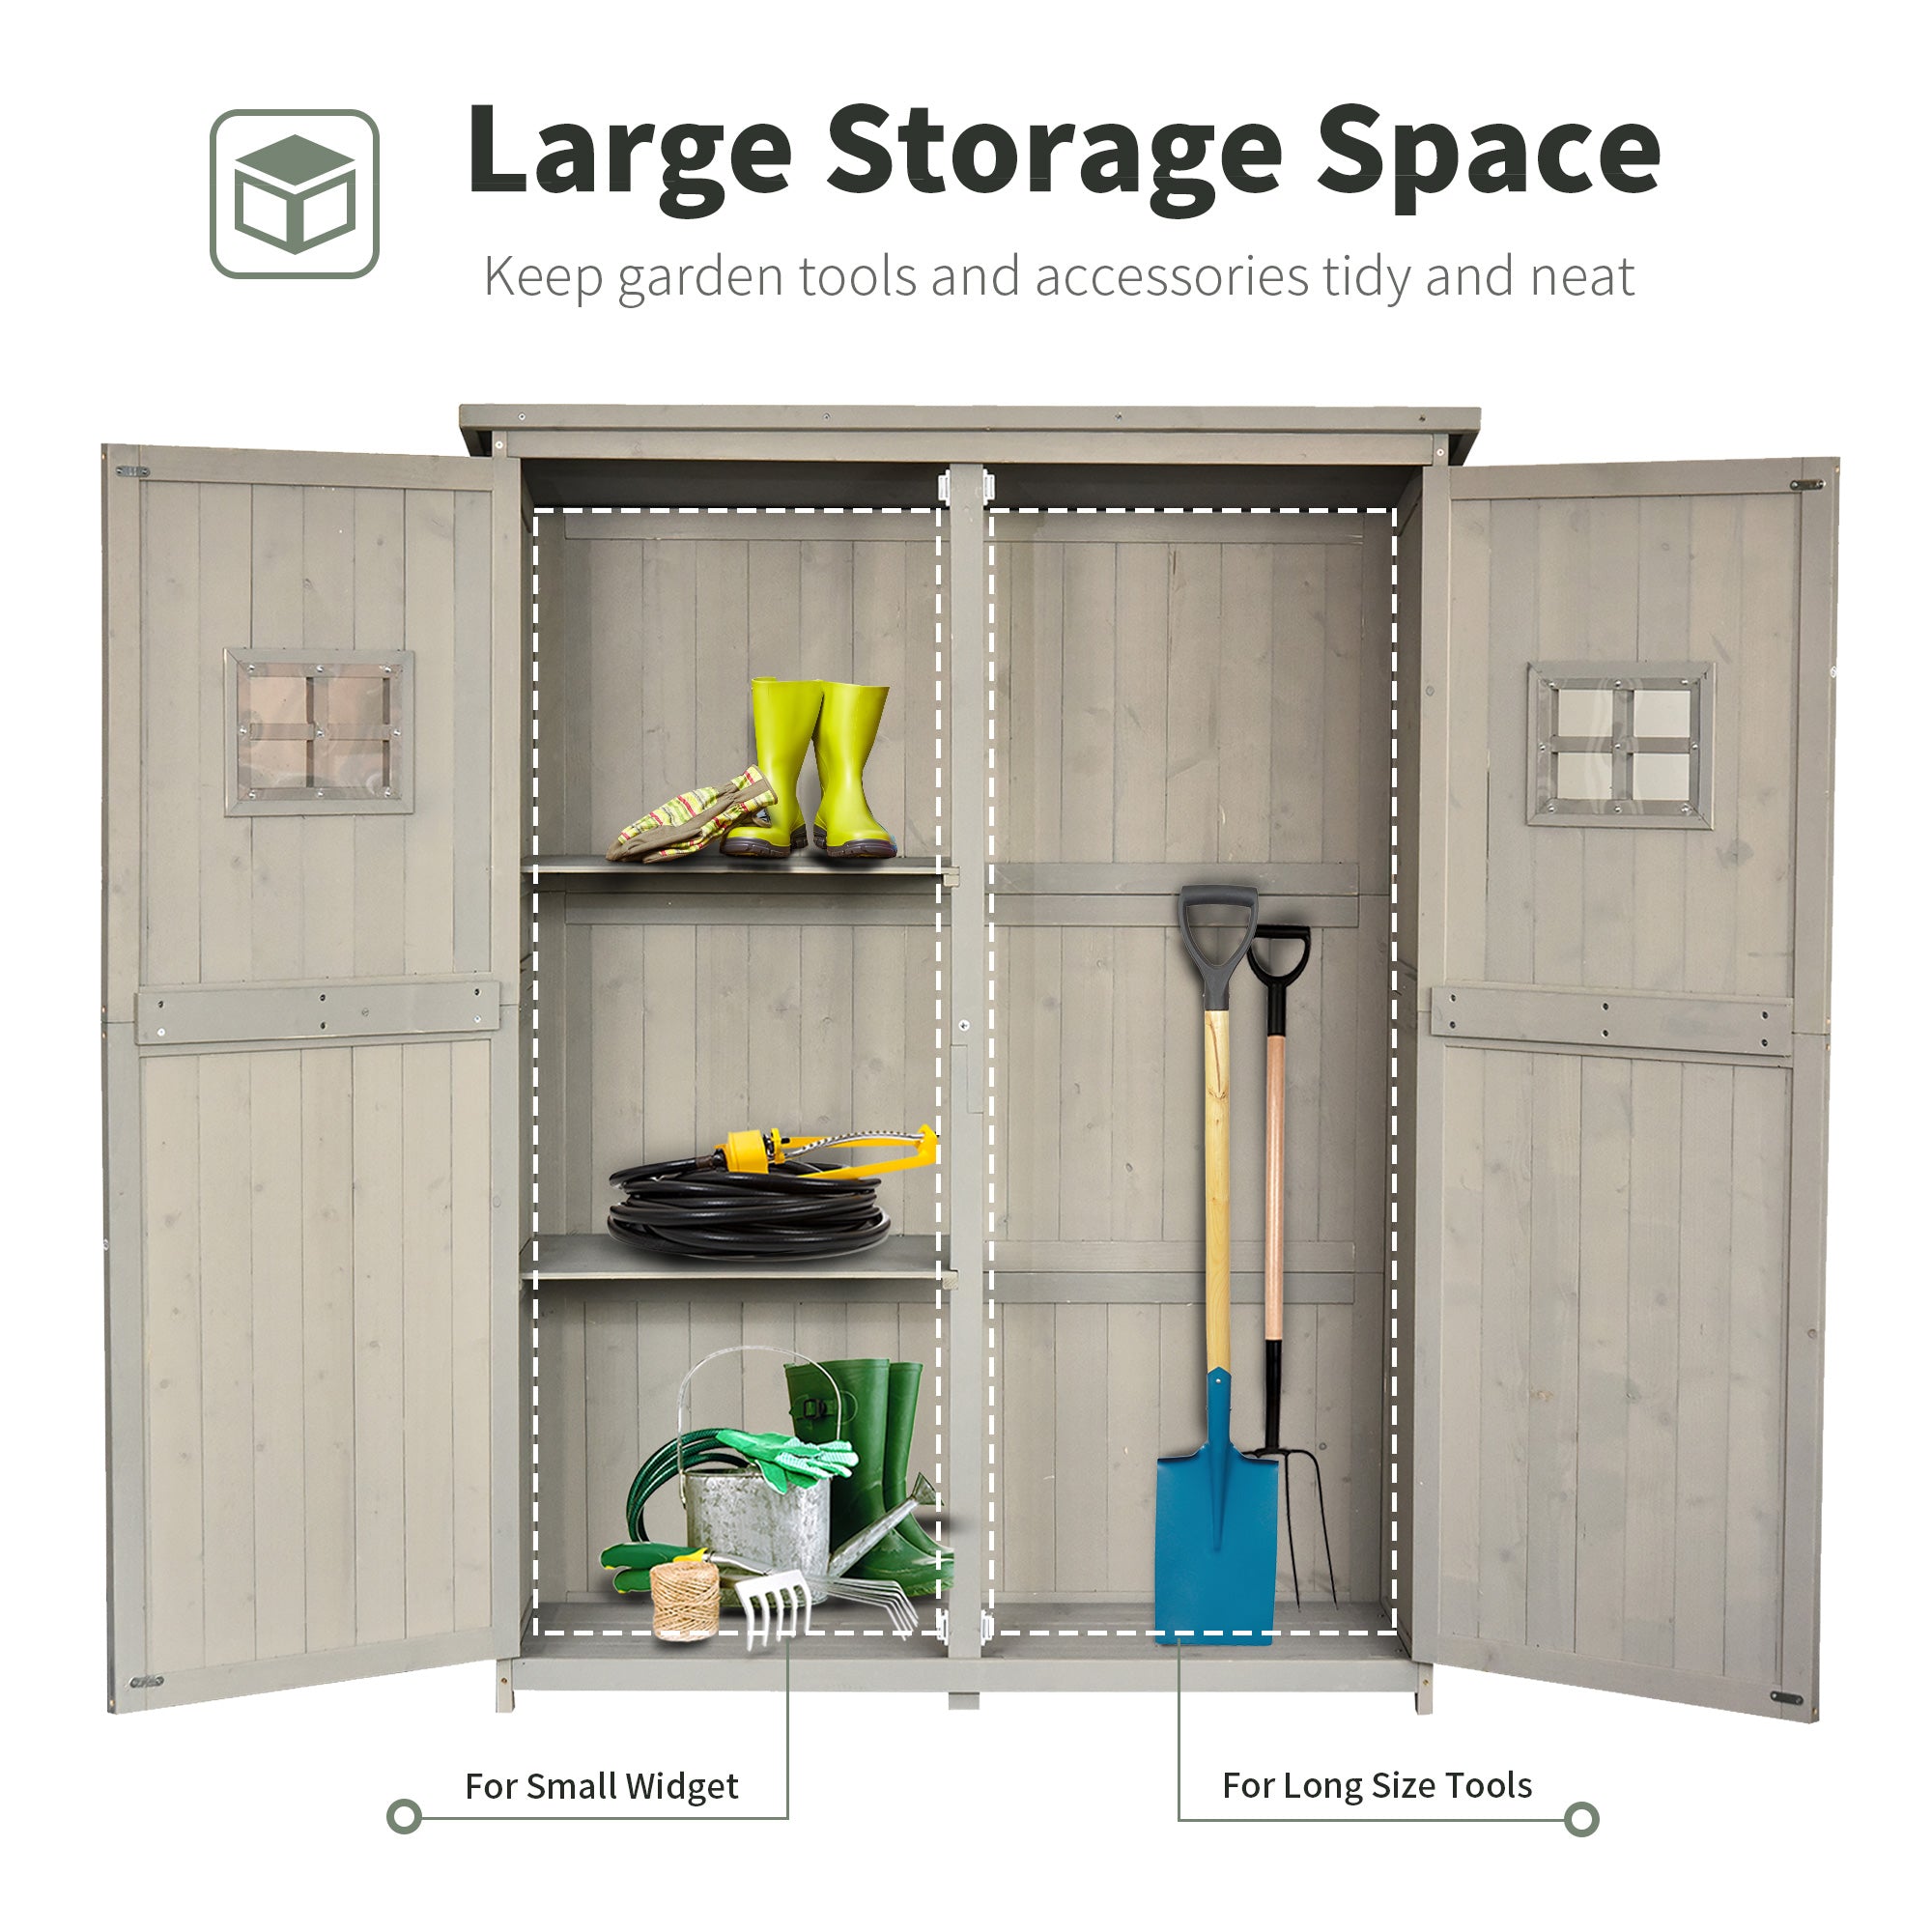 Outsunny Wooden Garden Shed Tool Storage Outsunny Wooden Garden Shed w/ Two Windows, Tool Storage Cabinet, 127.5L x 50W x 164H cm, Grey - Inspirely